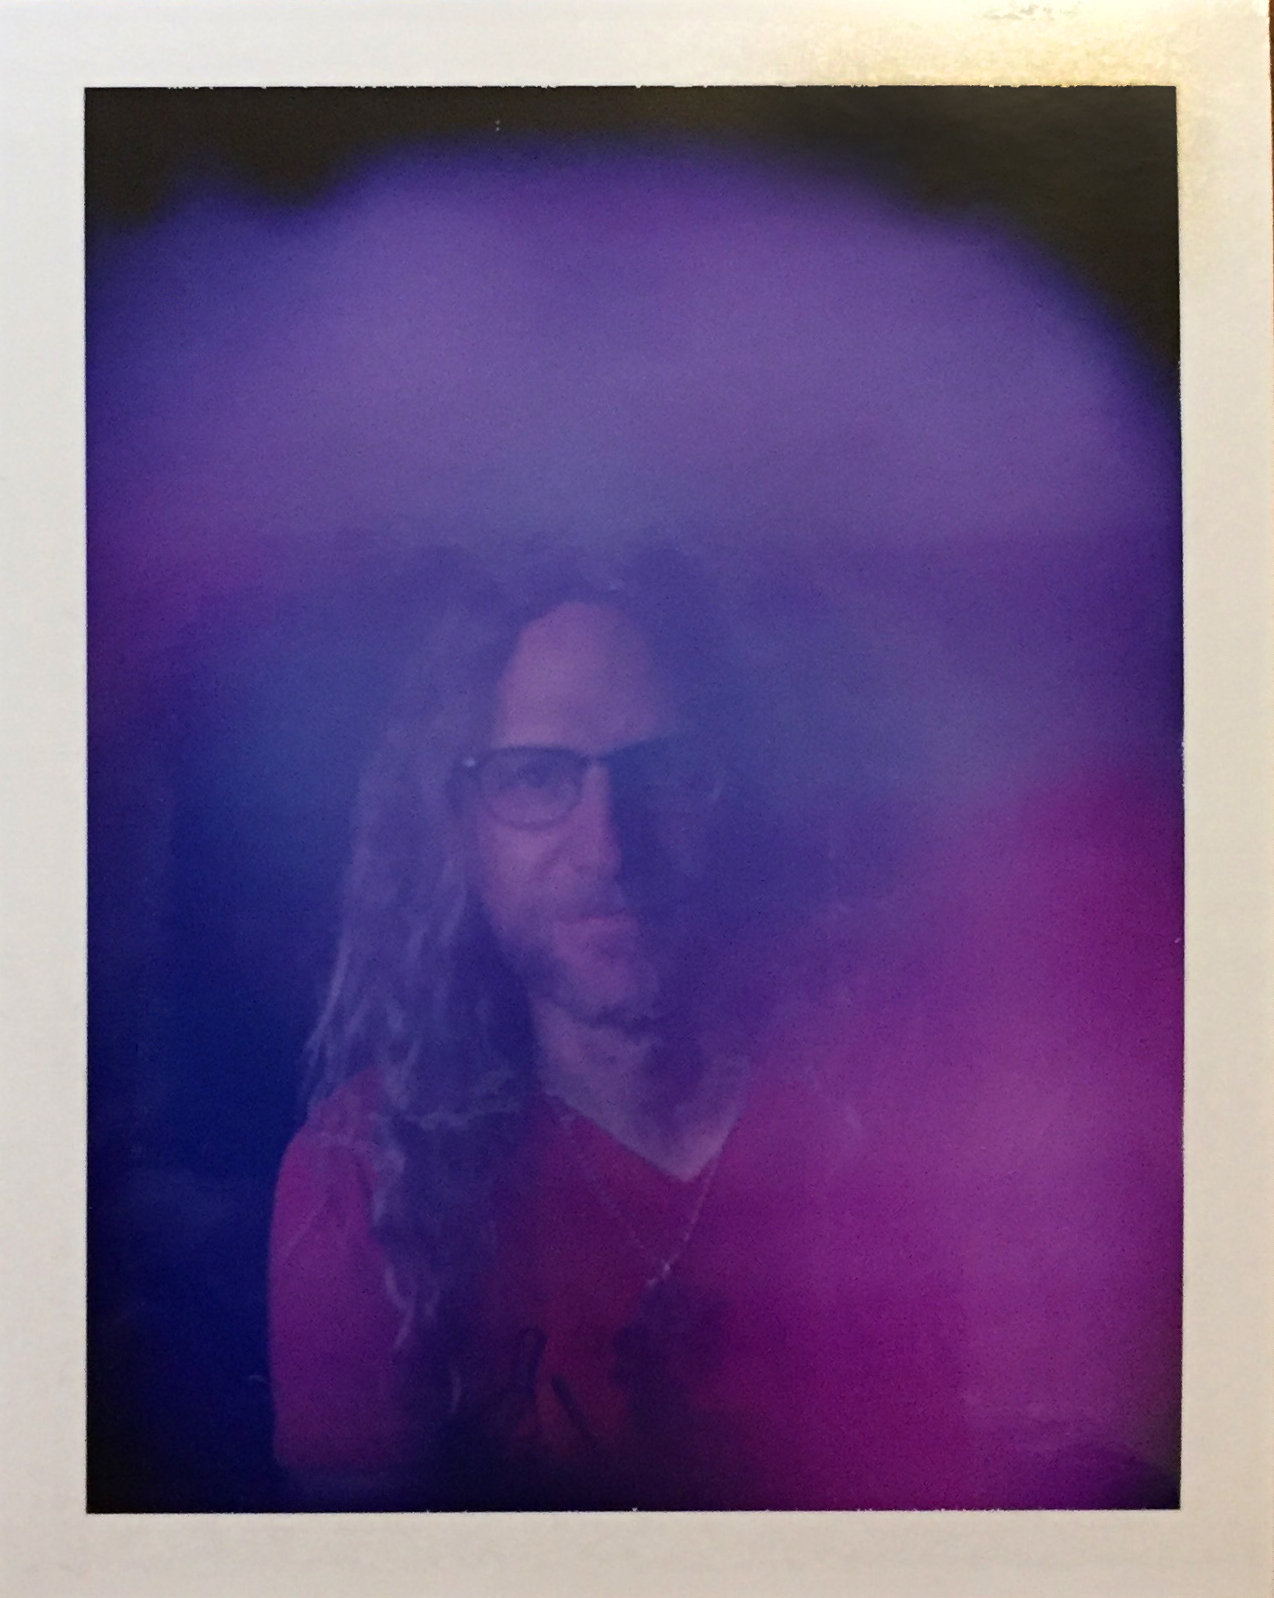 A polaroid photo of Peter, surrounded by a purple aura. He is wearing glasses and smiling softly. 